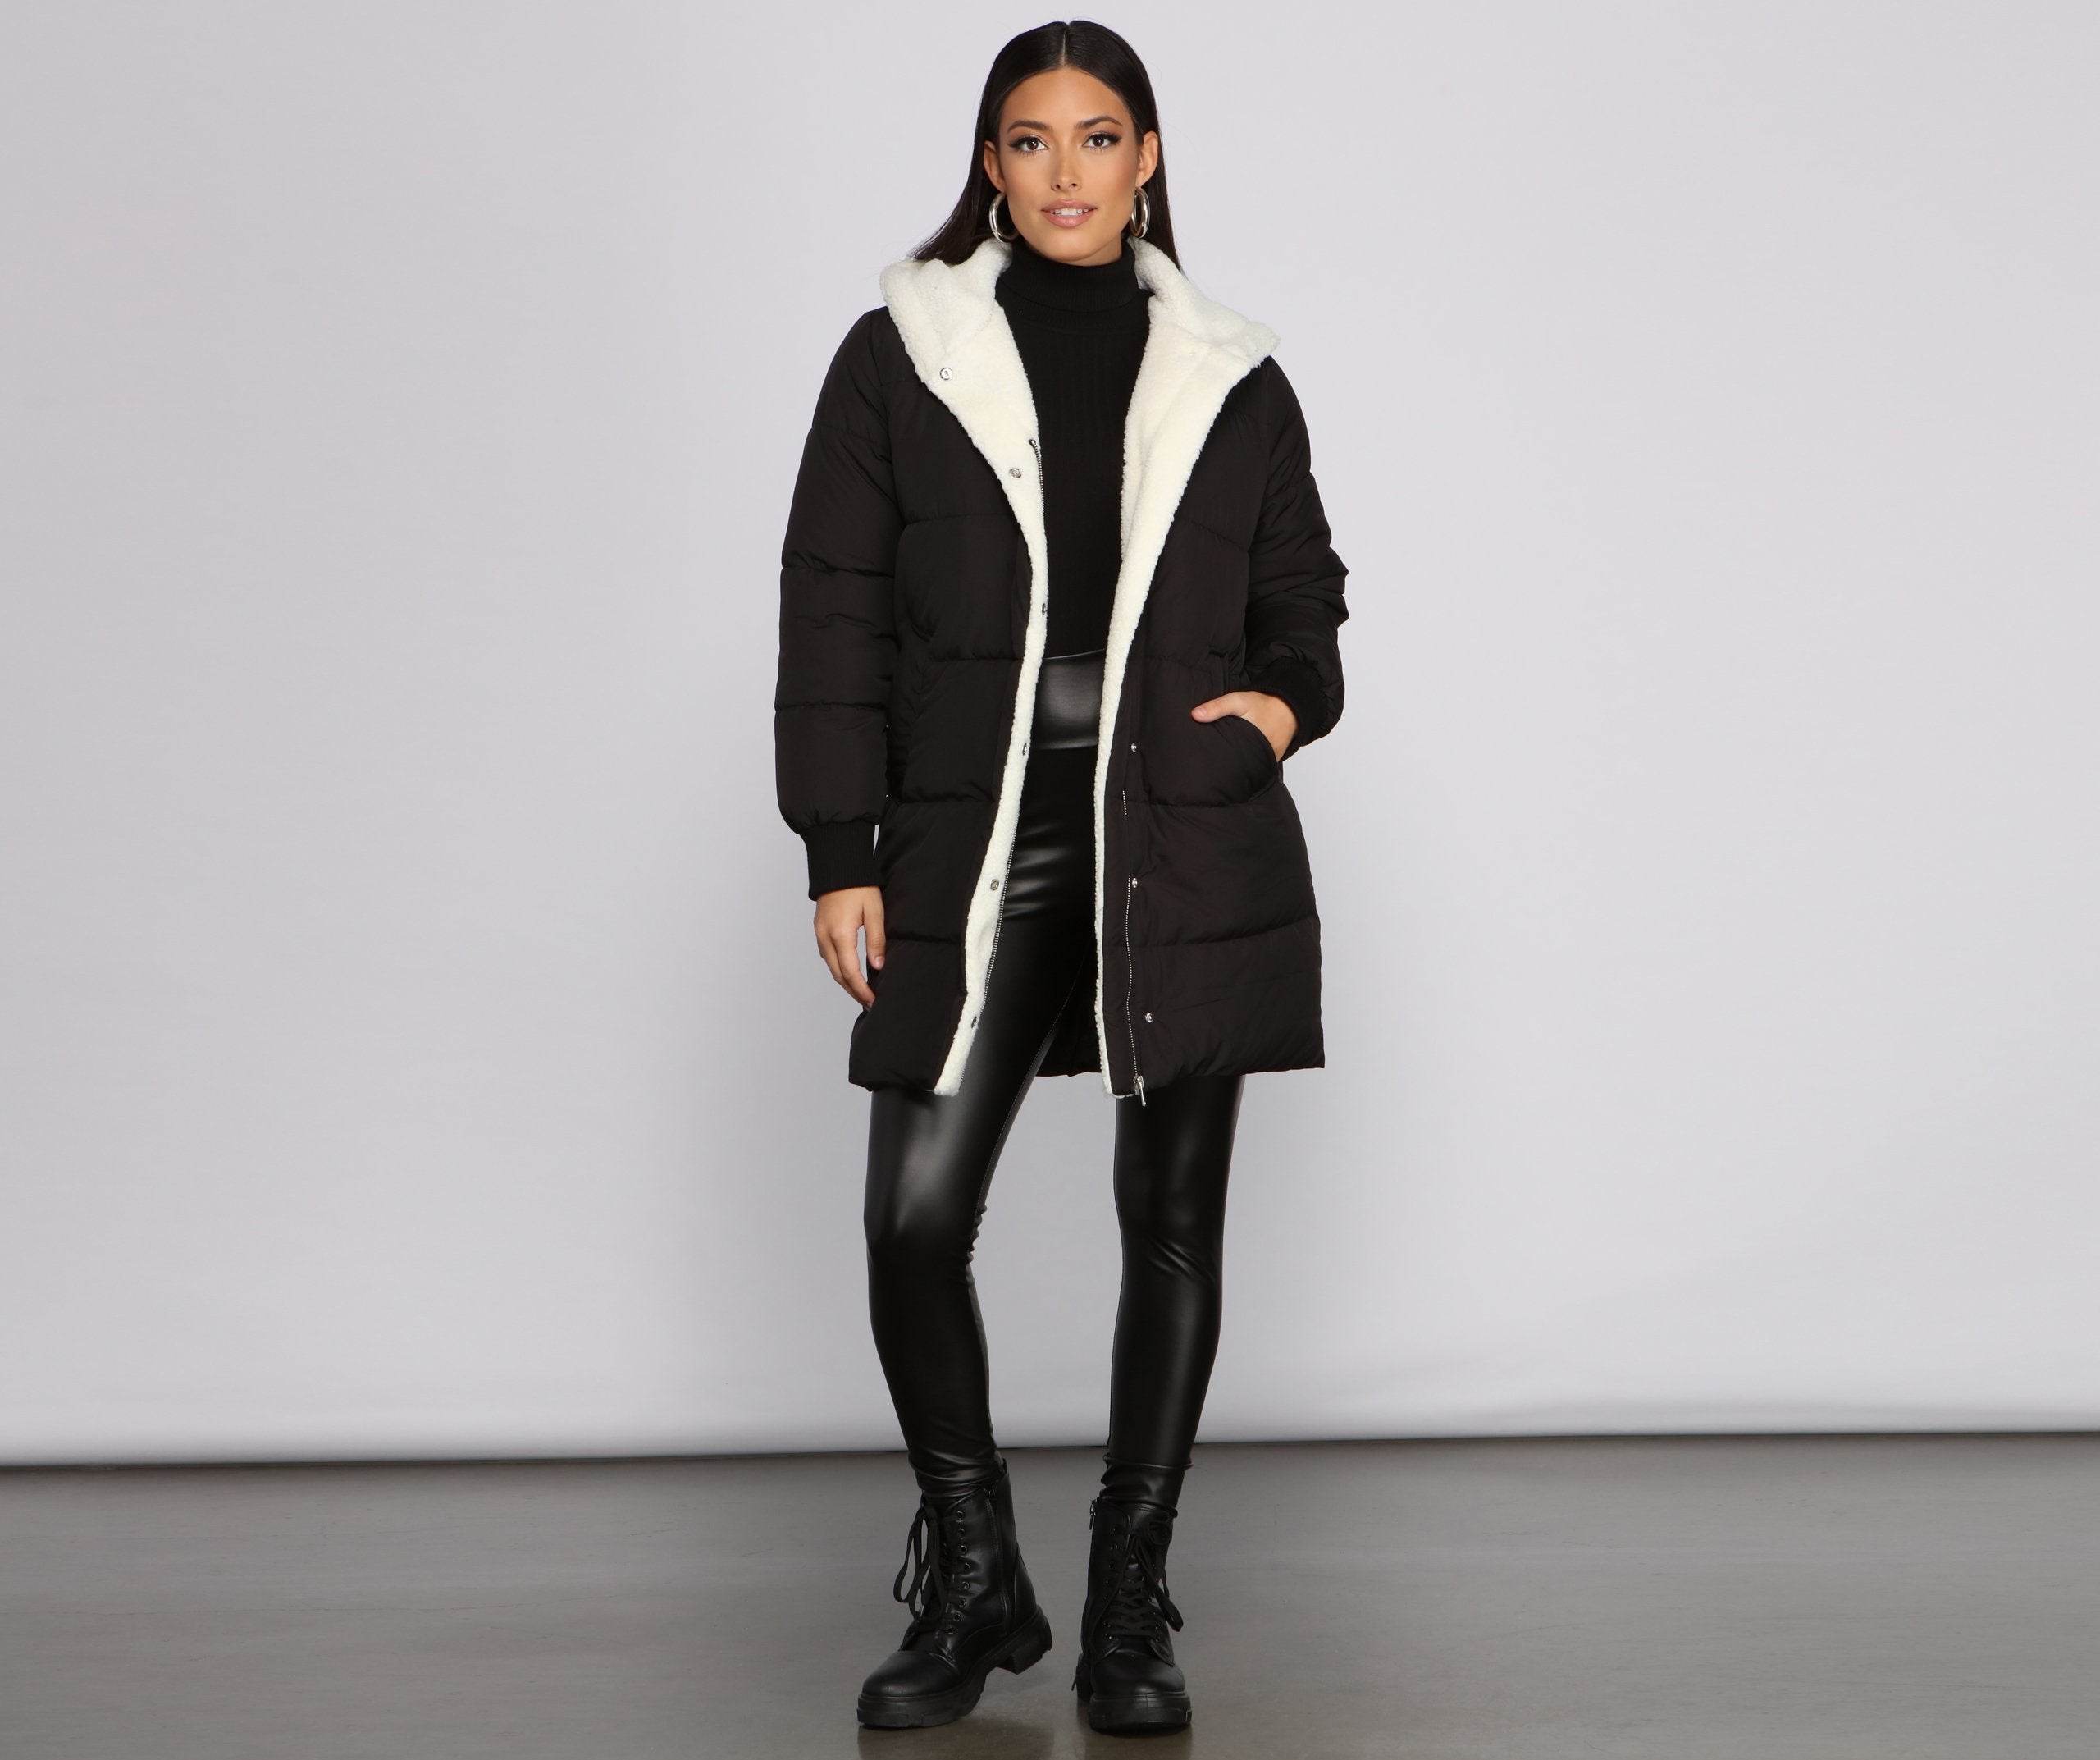 Cozy Up Long Line Puffer Jacket